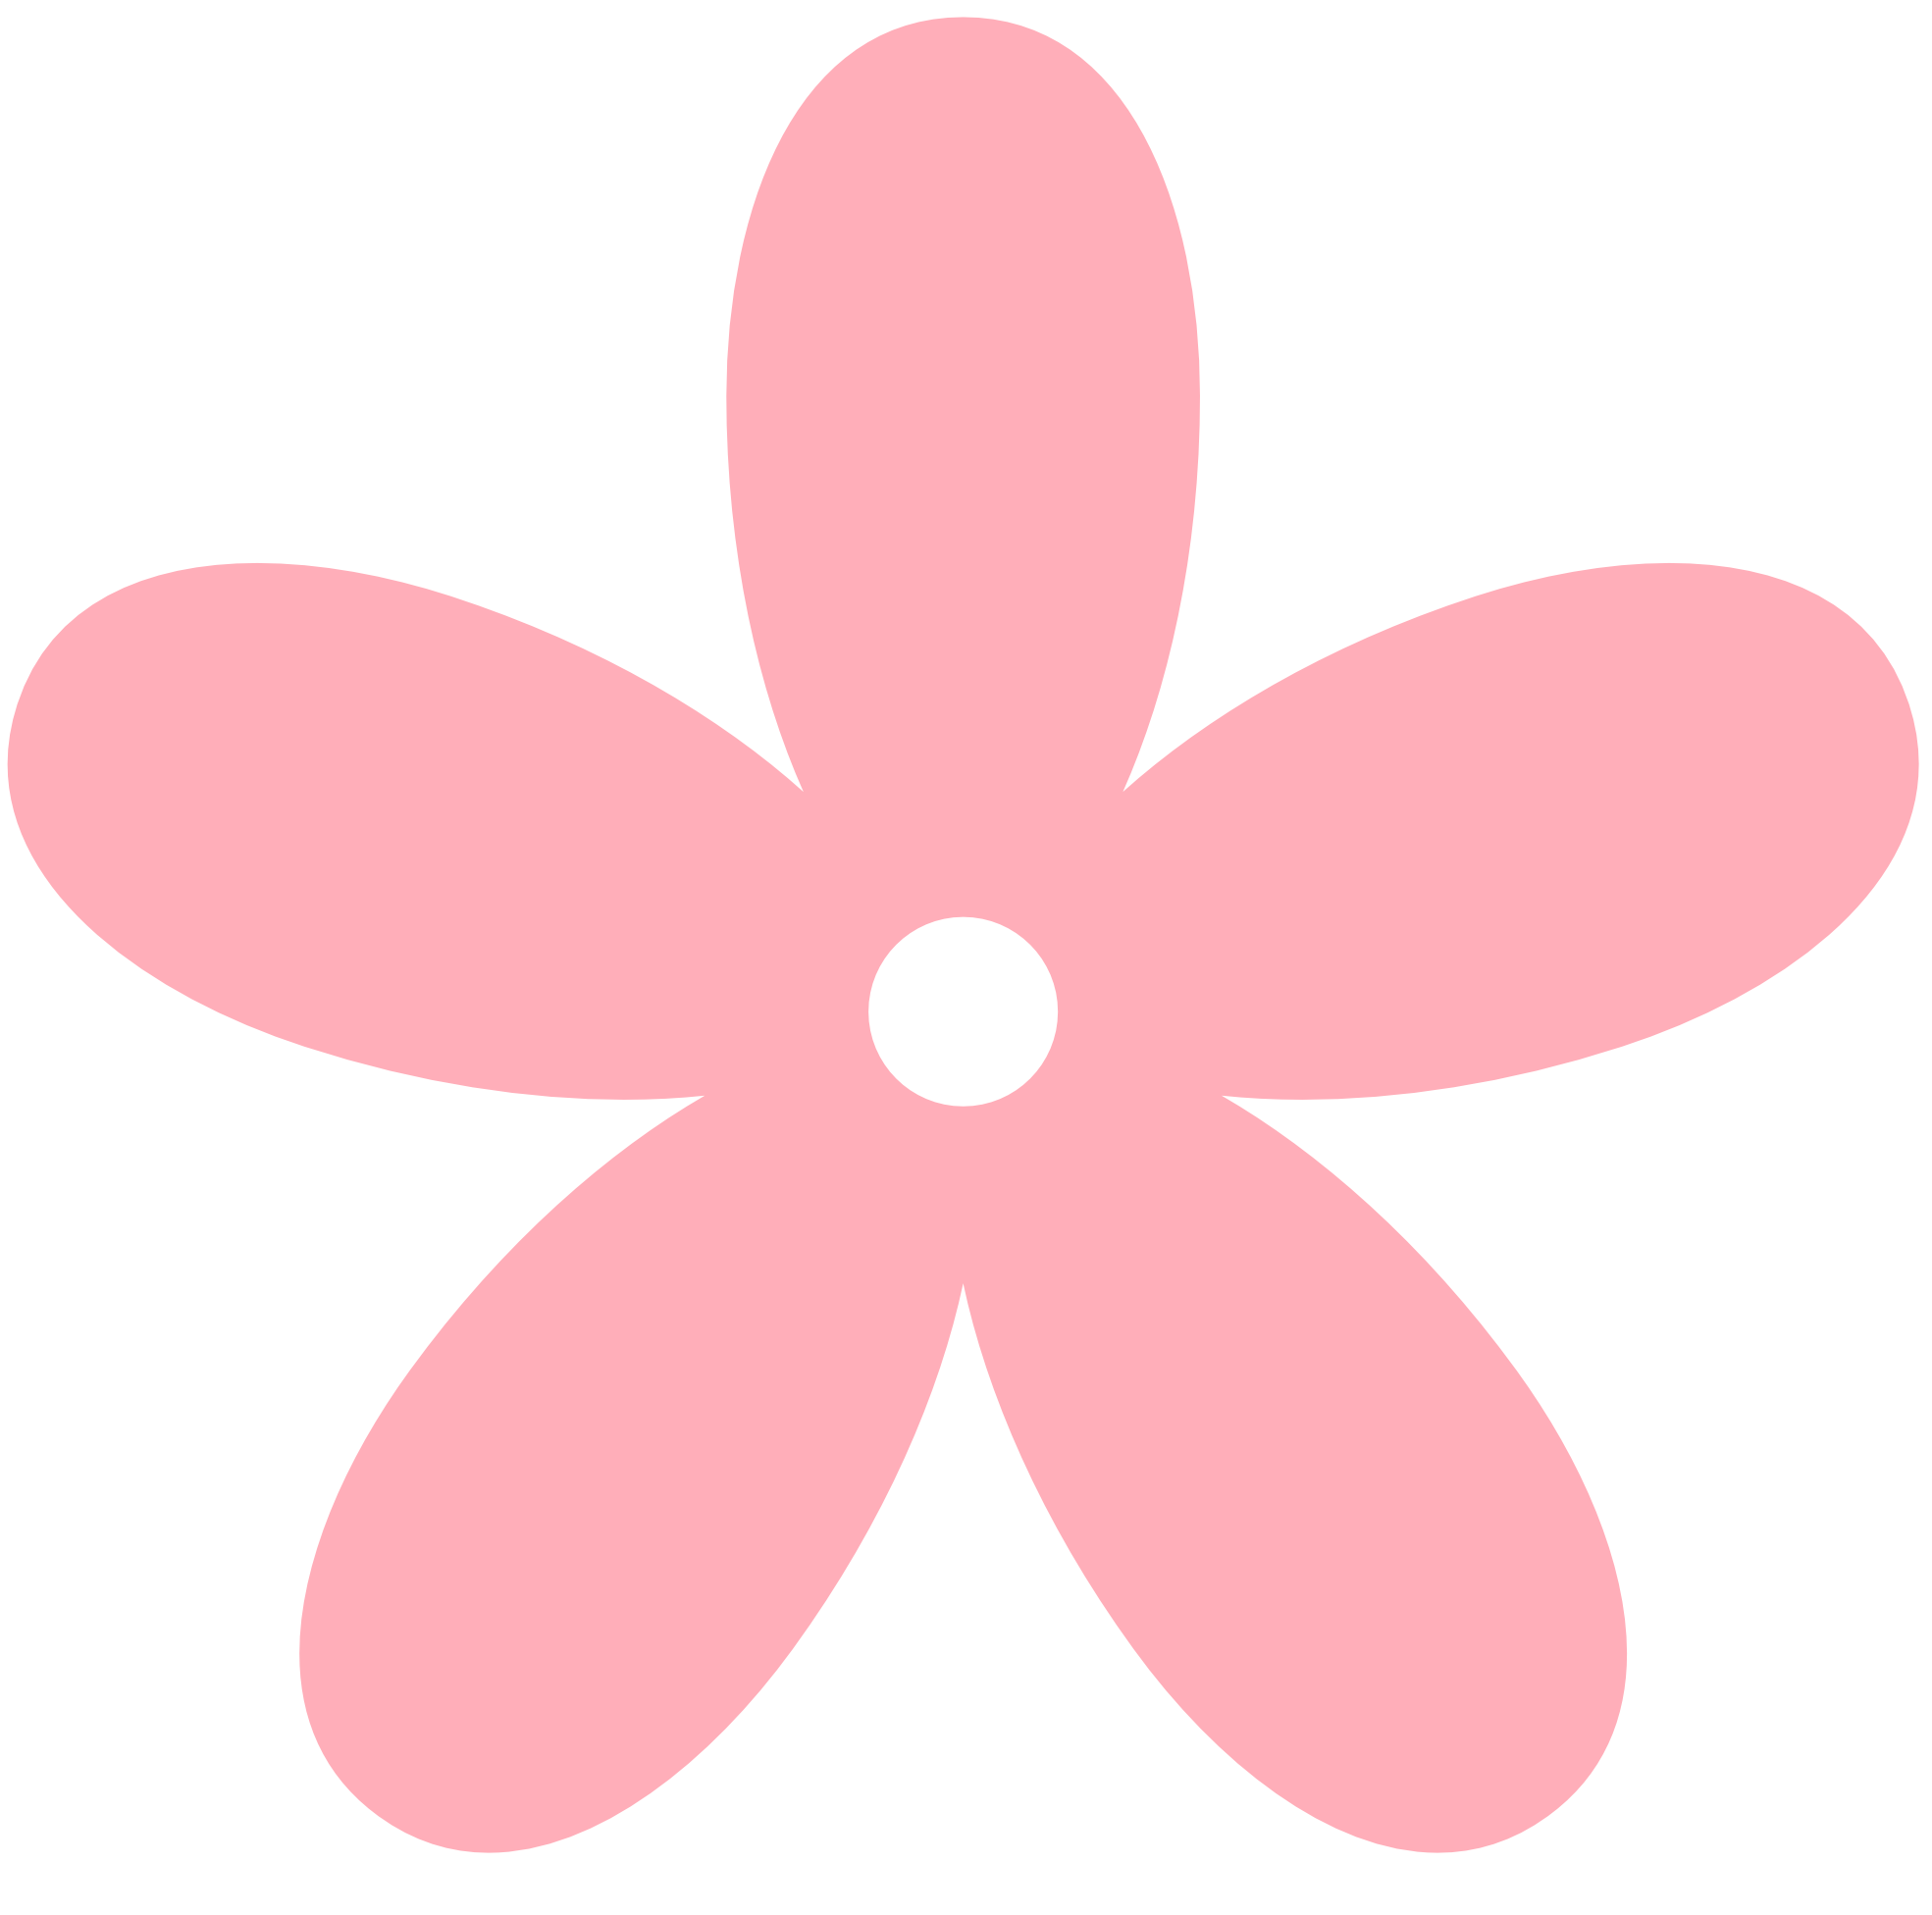 Pink Flower Cartoon - Cliparts.co